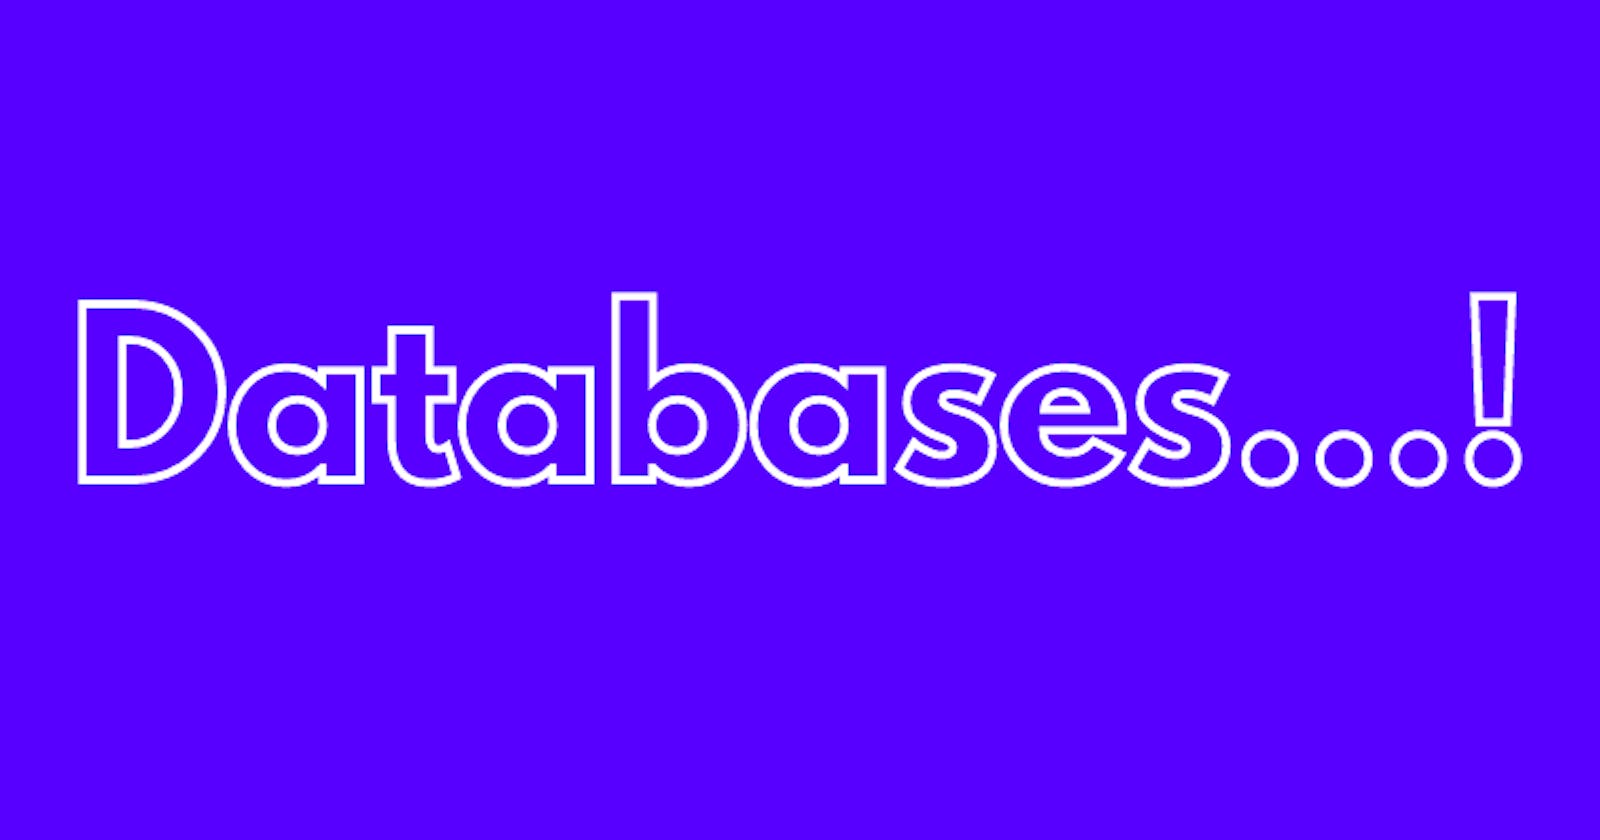 All things related to Databases